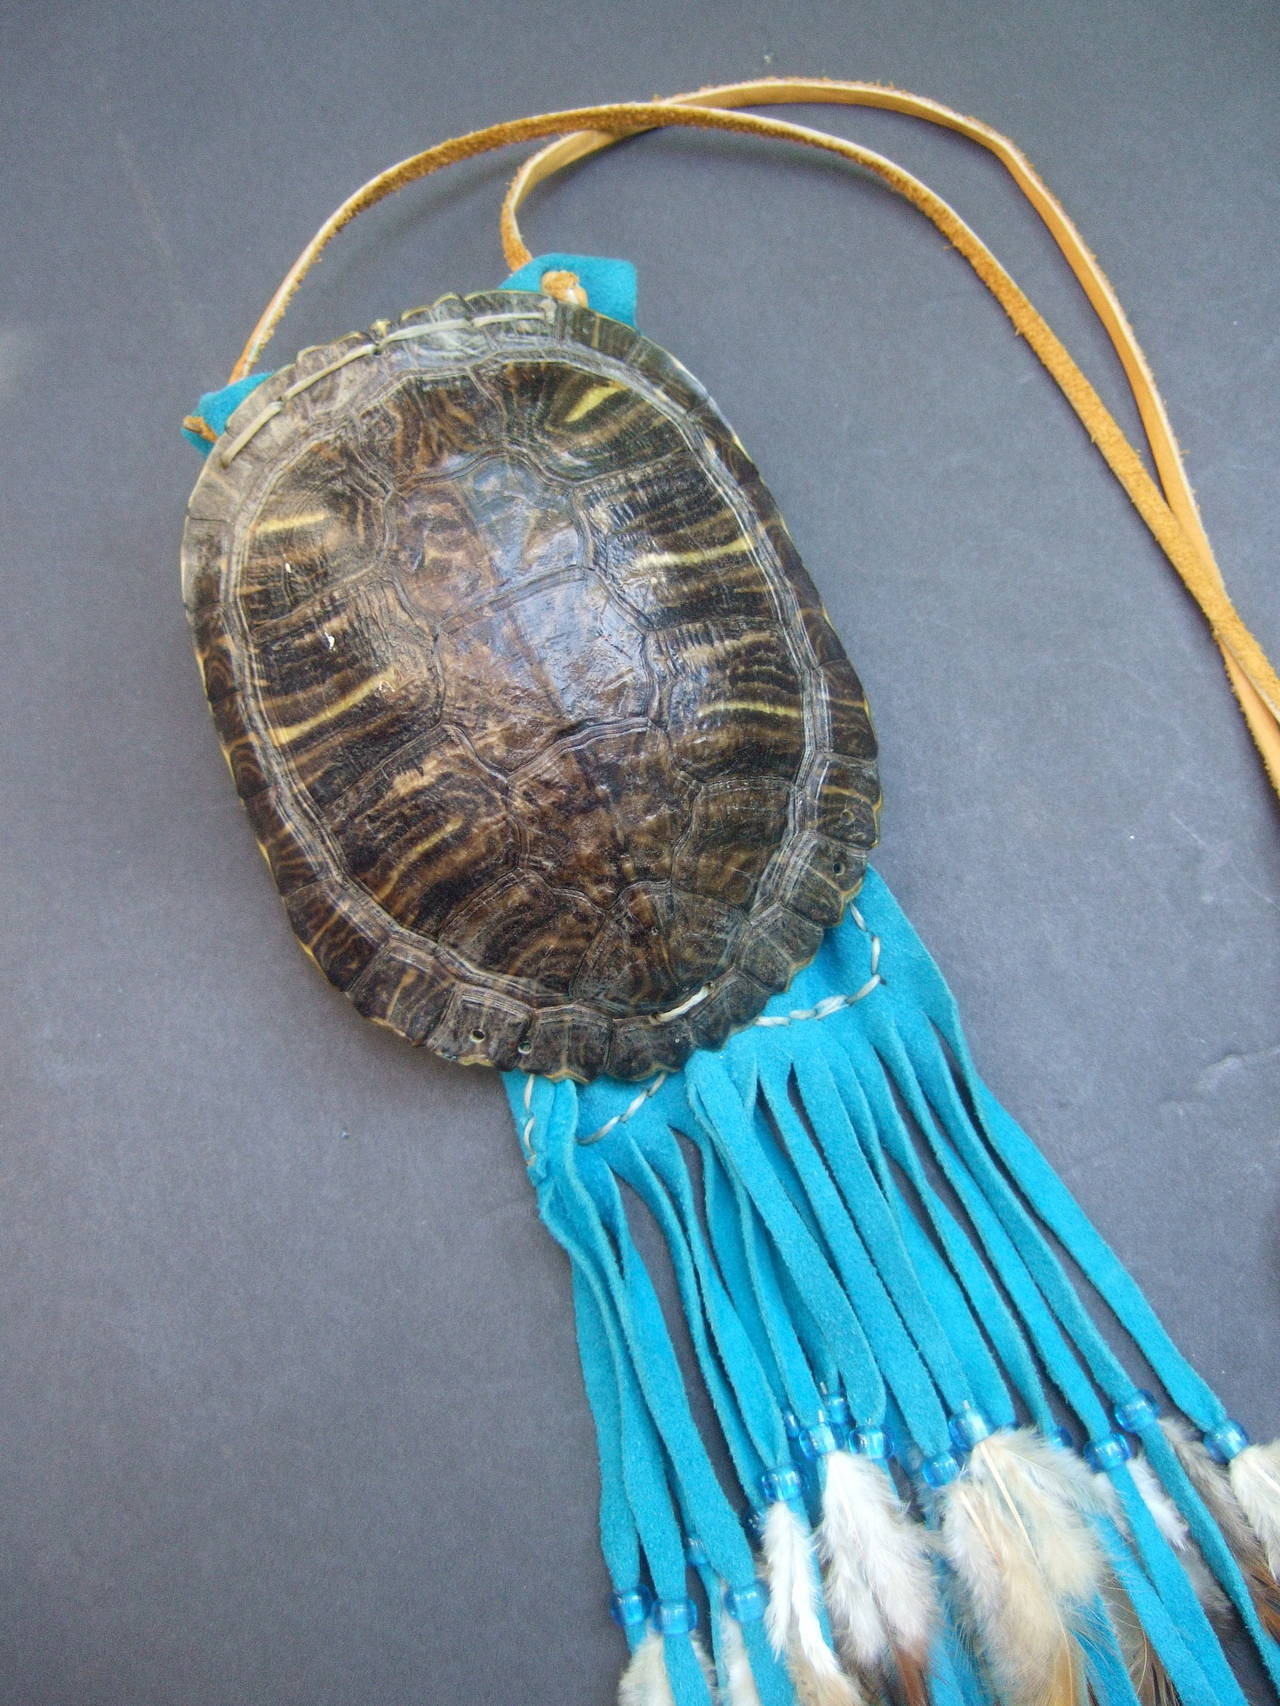 American Indian genuine turtle shell shoulder bag c 1970s
The unique artisan handbag is designed with a turtle
shell that serves as the small handbag interior

The handmade turtle shell is strung together with
both the top & bottom shell.